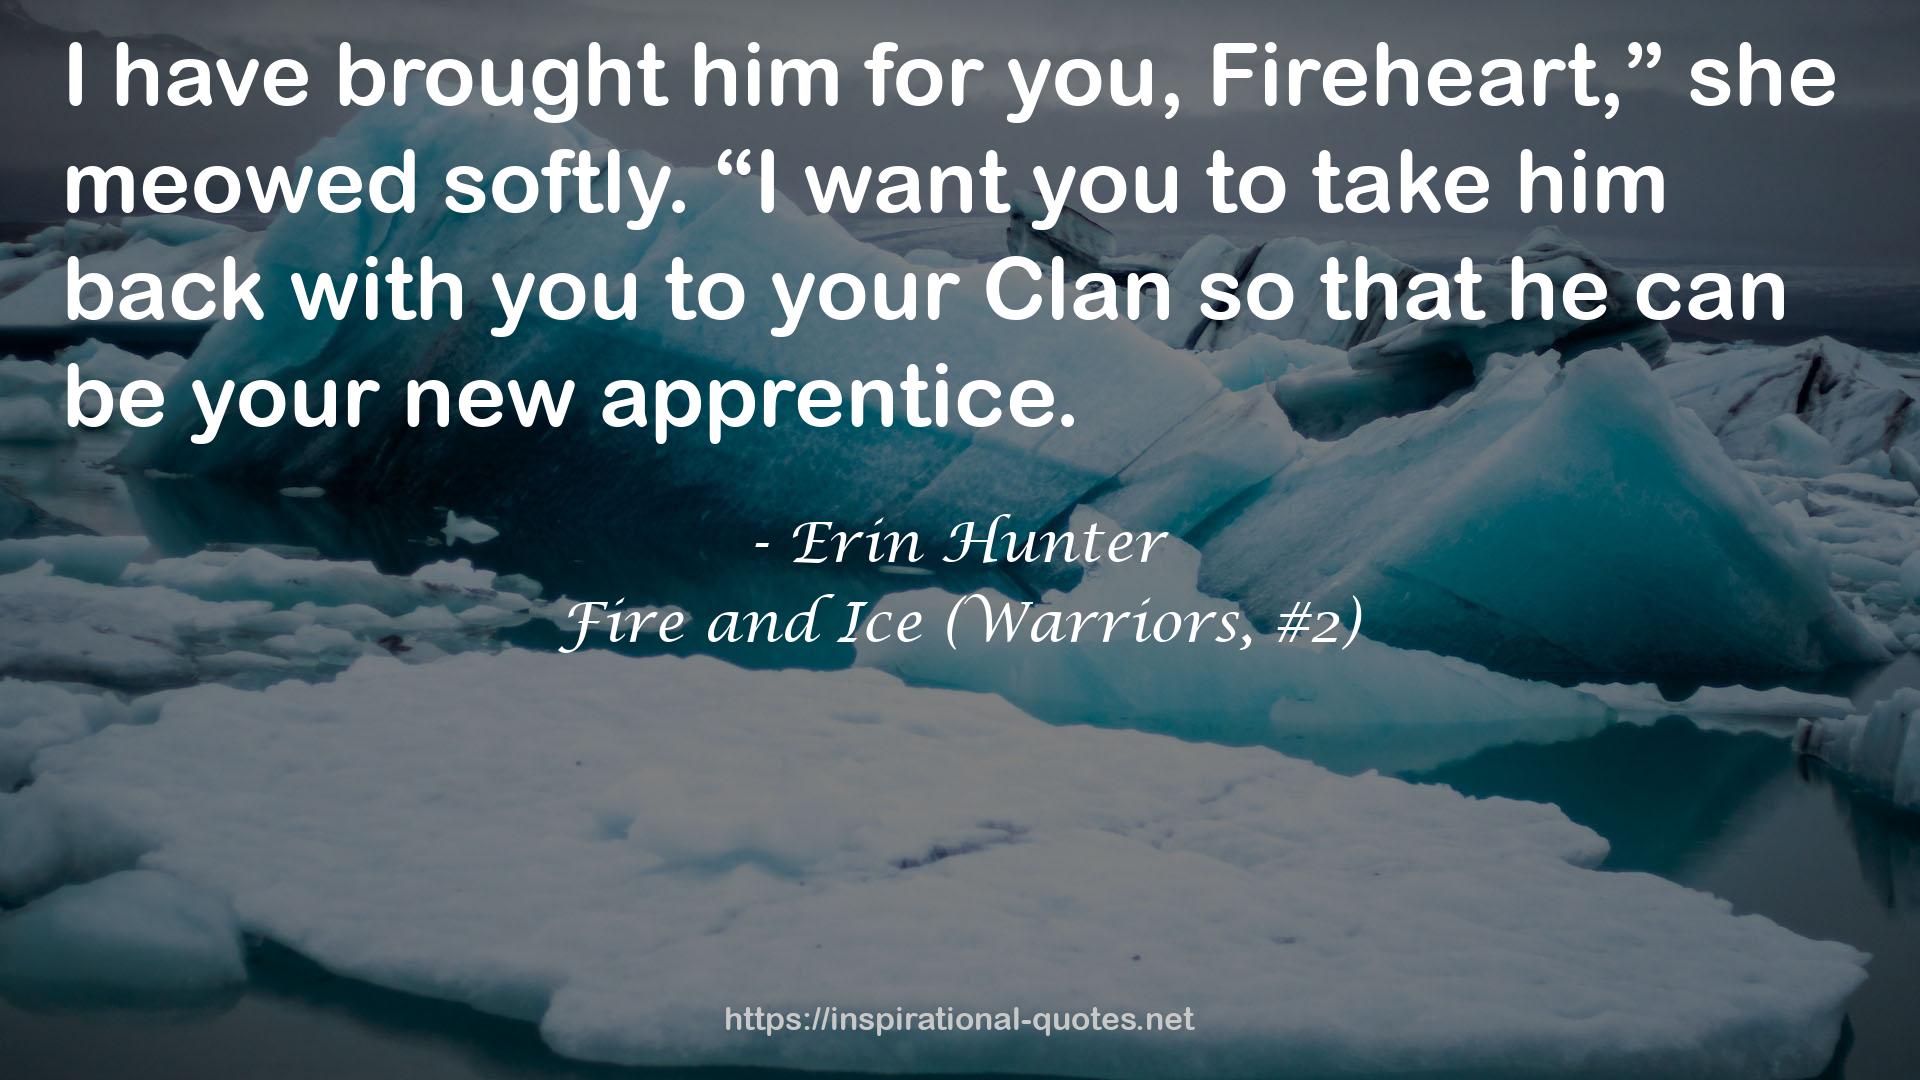 Fire and Ice (Warriors, #2) QUOTES